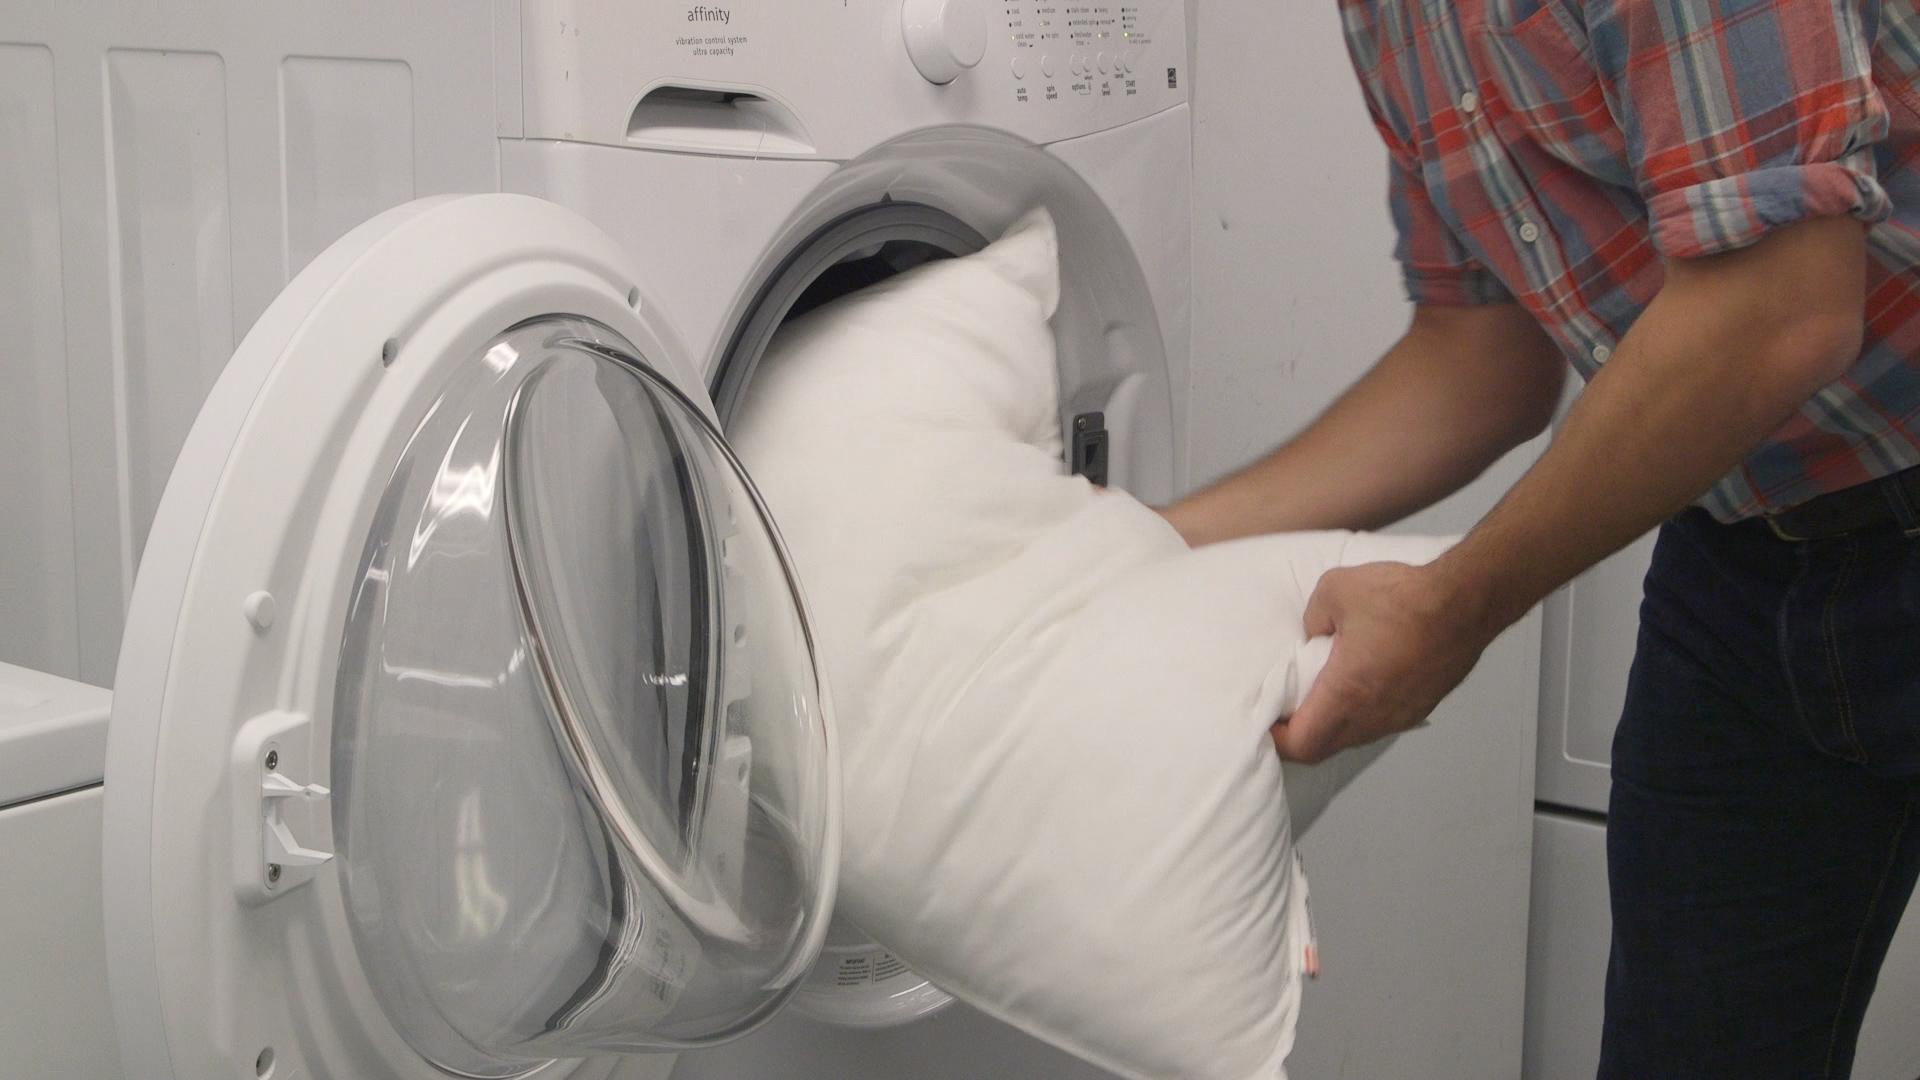 How to Wash Large Pillows or Cushions? Follow These Steps